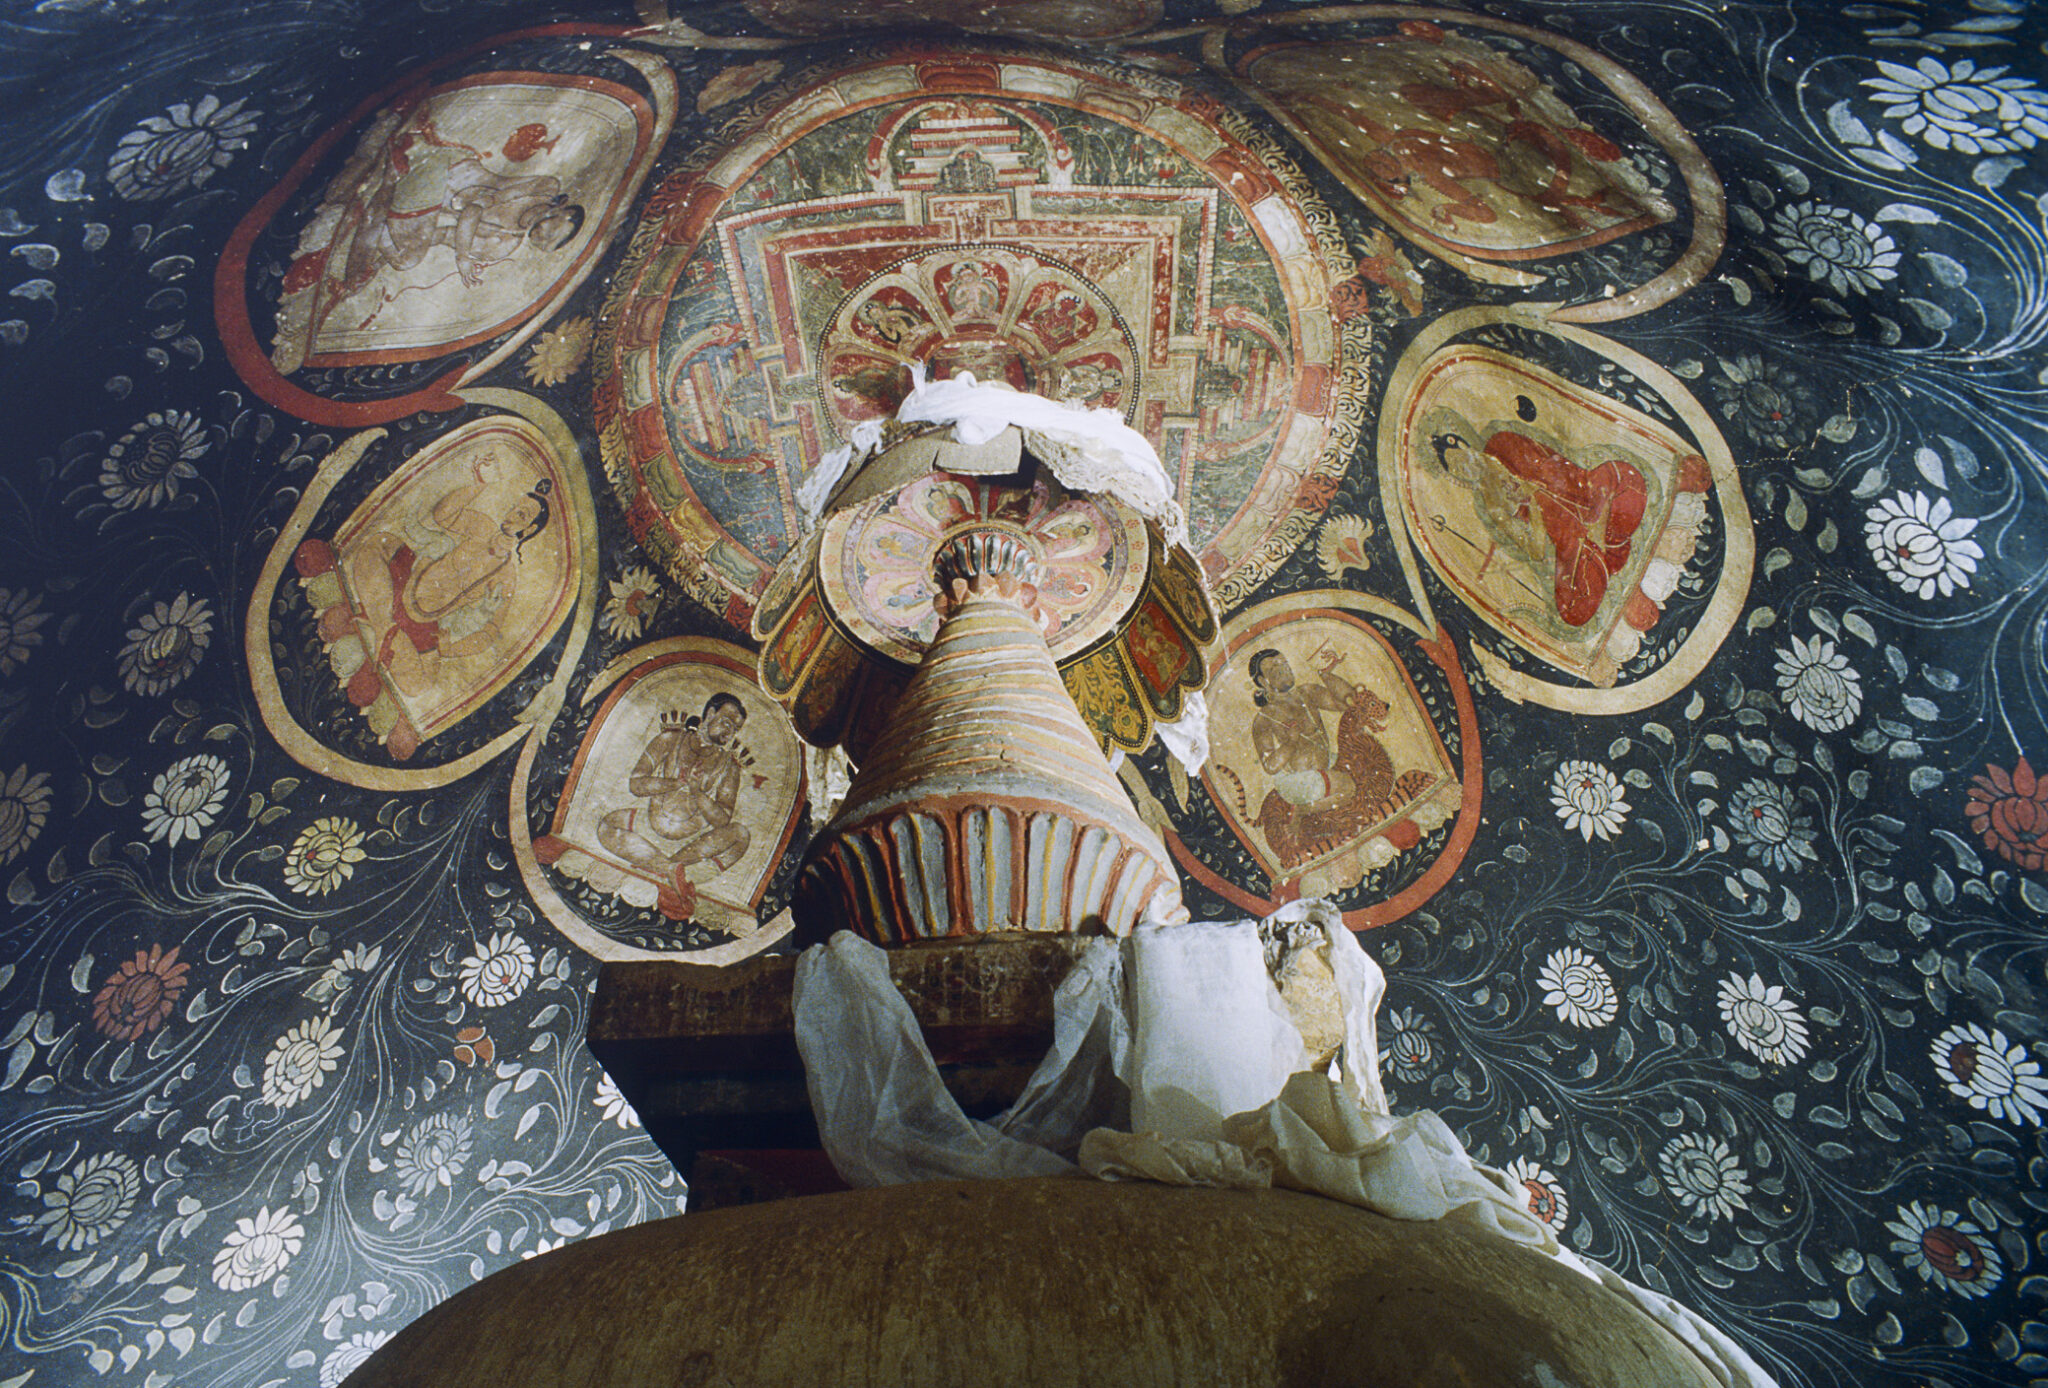 Dome viewed from base of chorten adorned with scarves; mandala at apex encircled by portraits in roundels